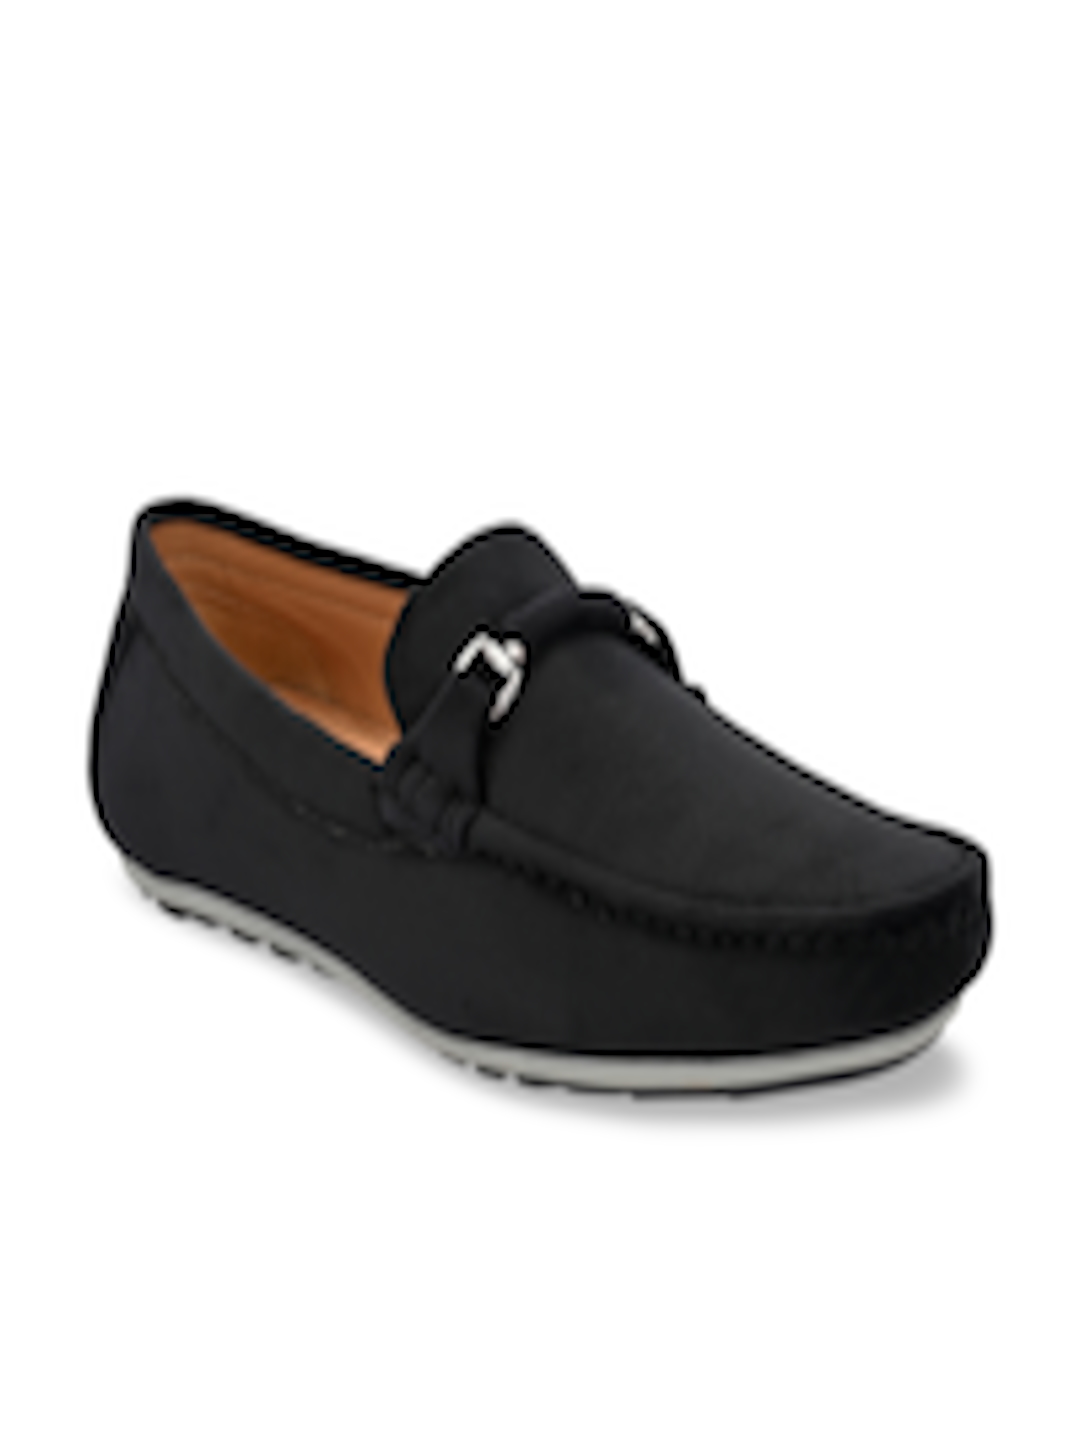 Buy Guava Men Black Driving Shoes - Casual Shoes for Men 12006984 | Myntra